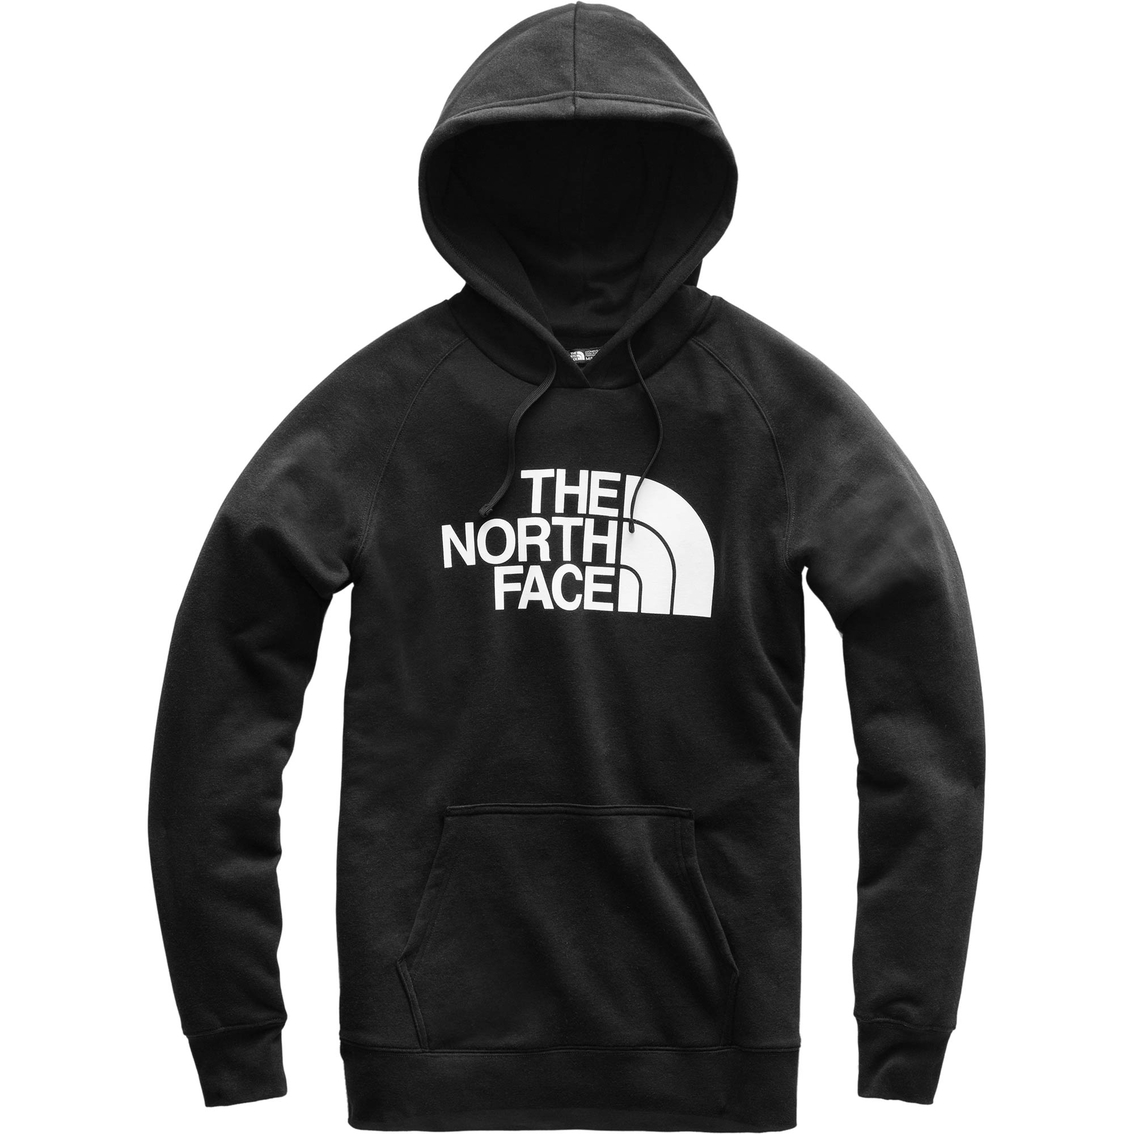 The North Face Jumbo Half Dome Pullover Hoodie | Tops | Clothing ...